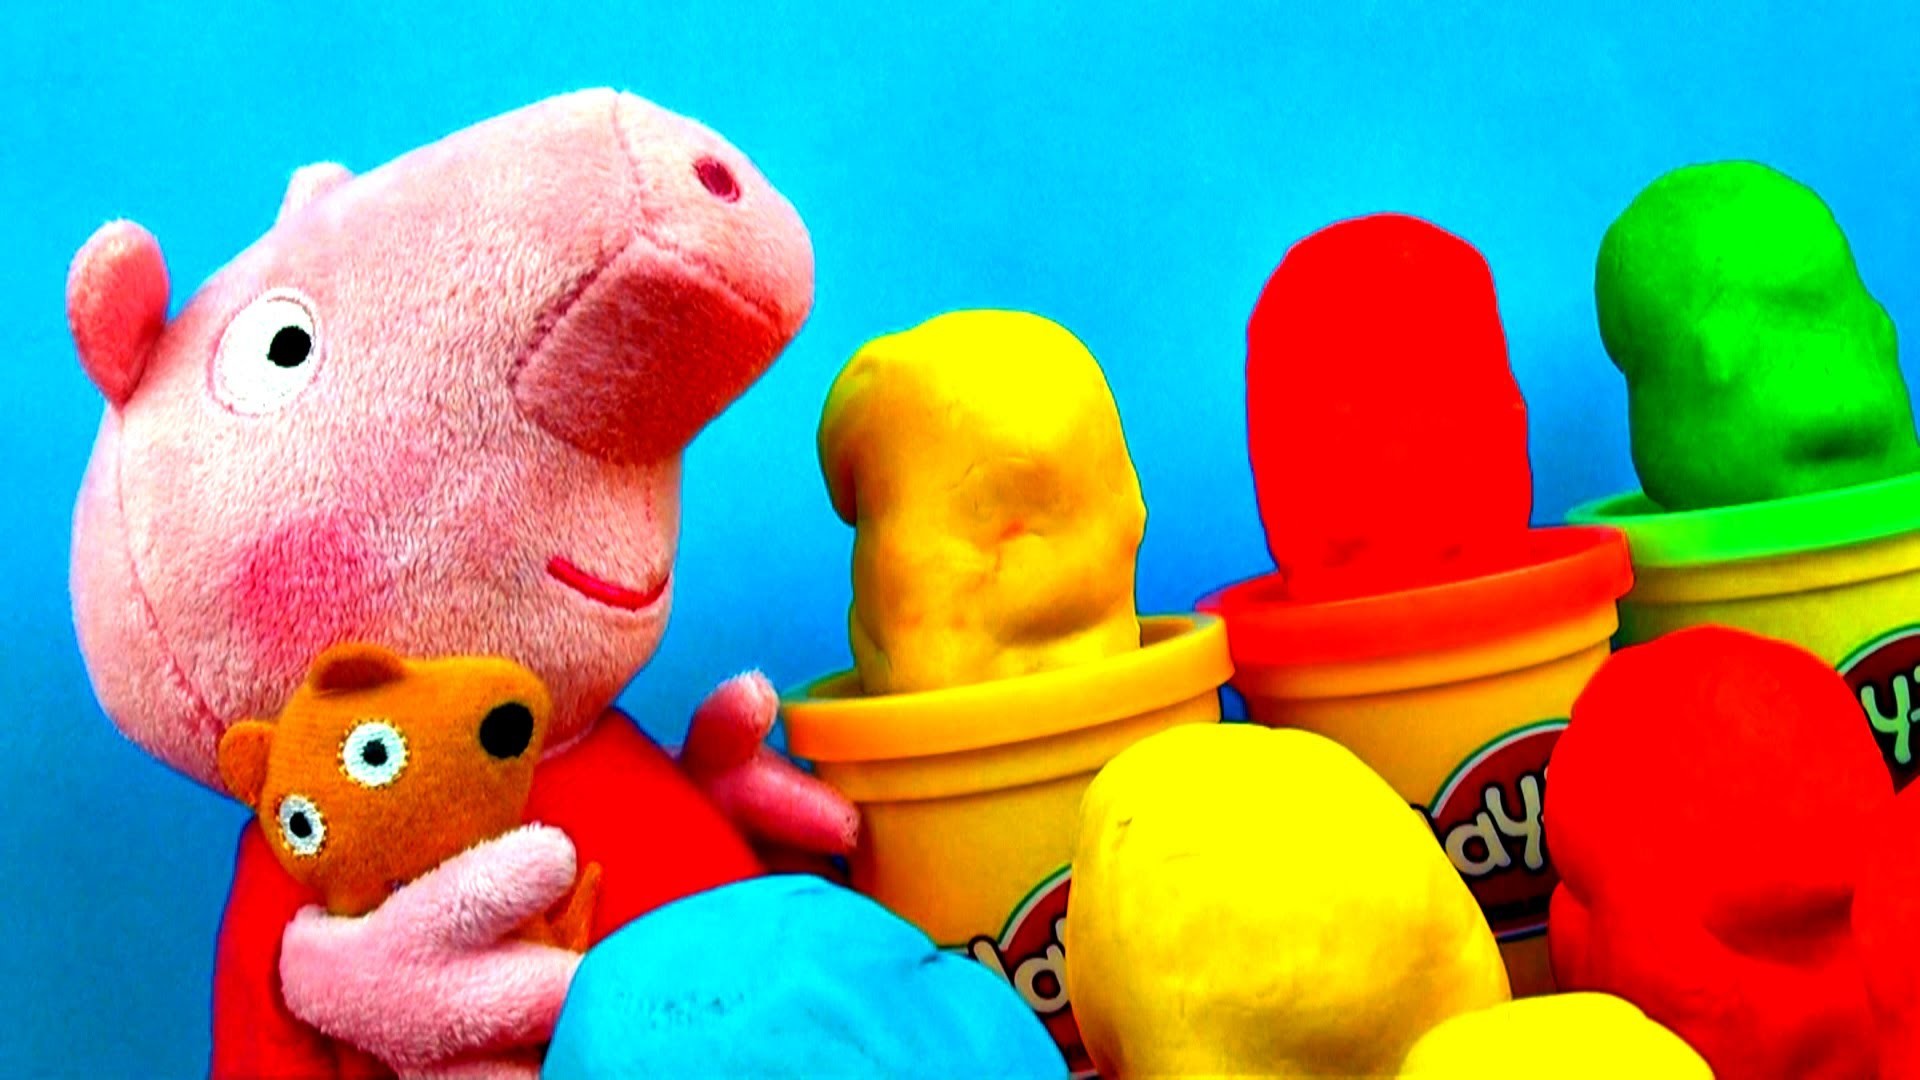 Peppa Pig Play Doh Surprise Easter Eggs Spongebob Play Dough Hello Kitty Toy Surprise with Peppa Pig